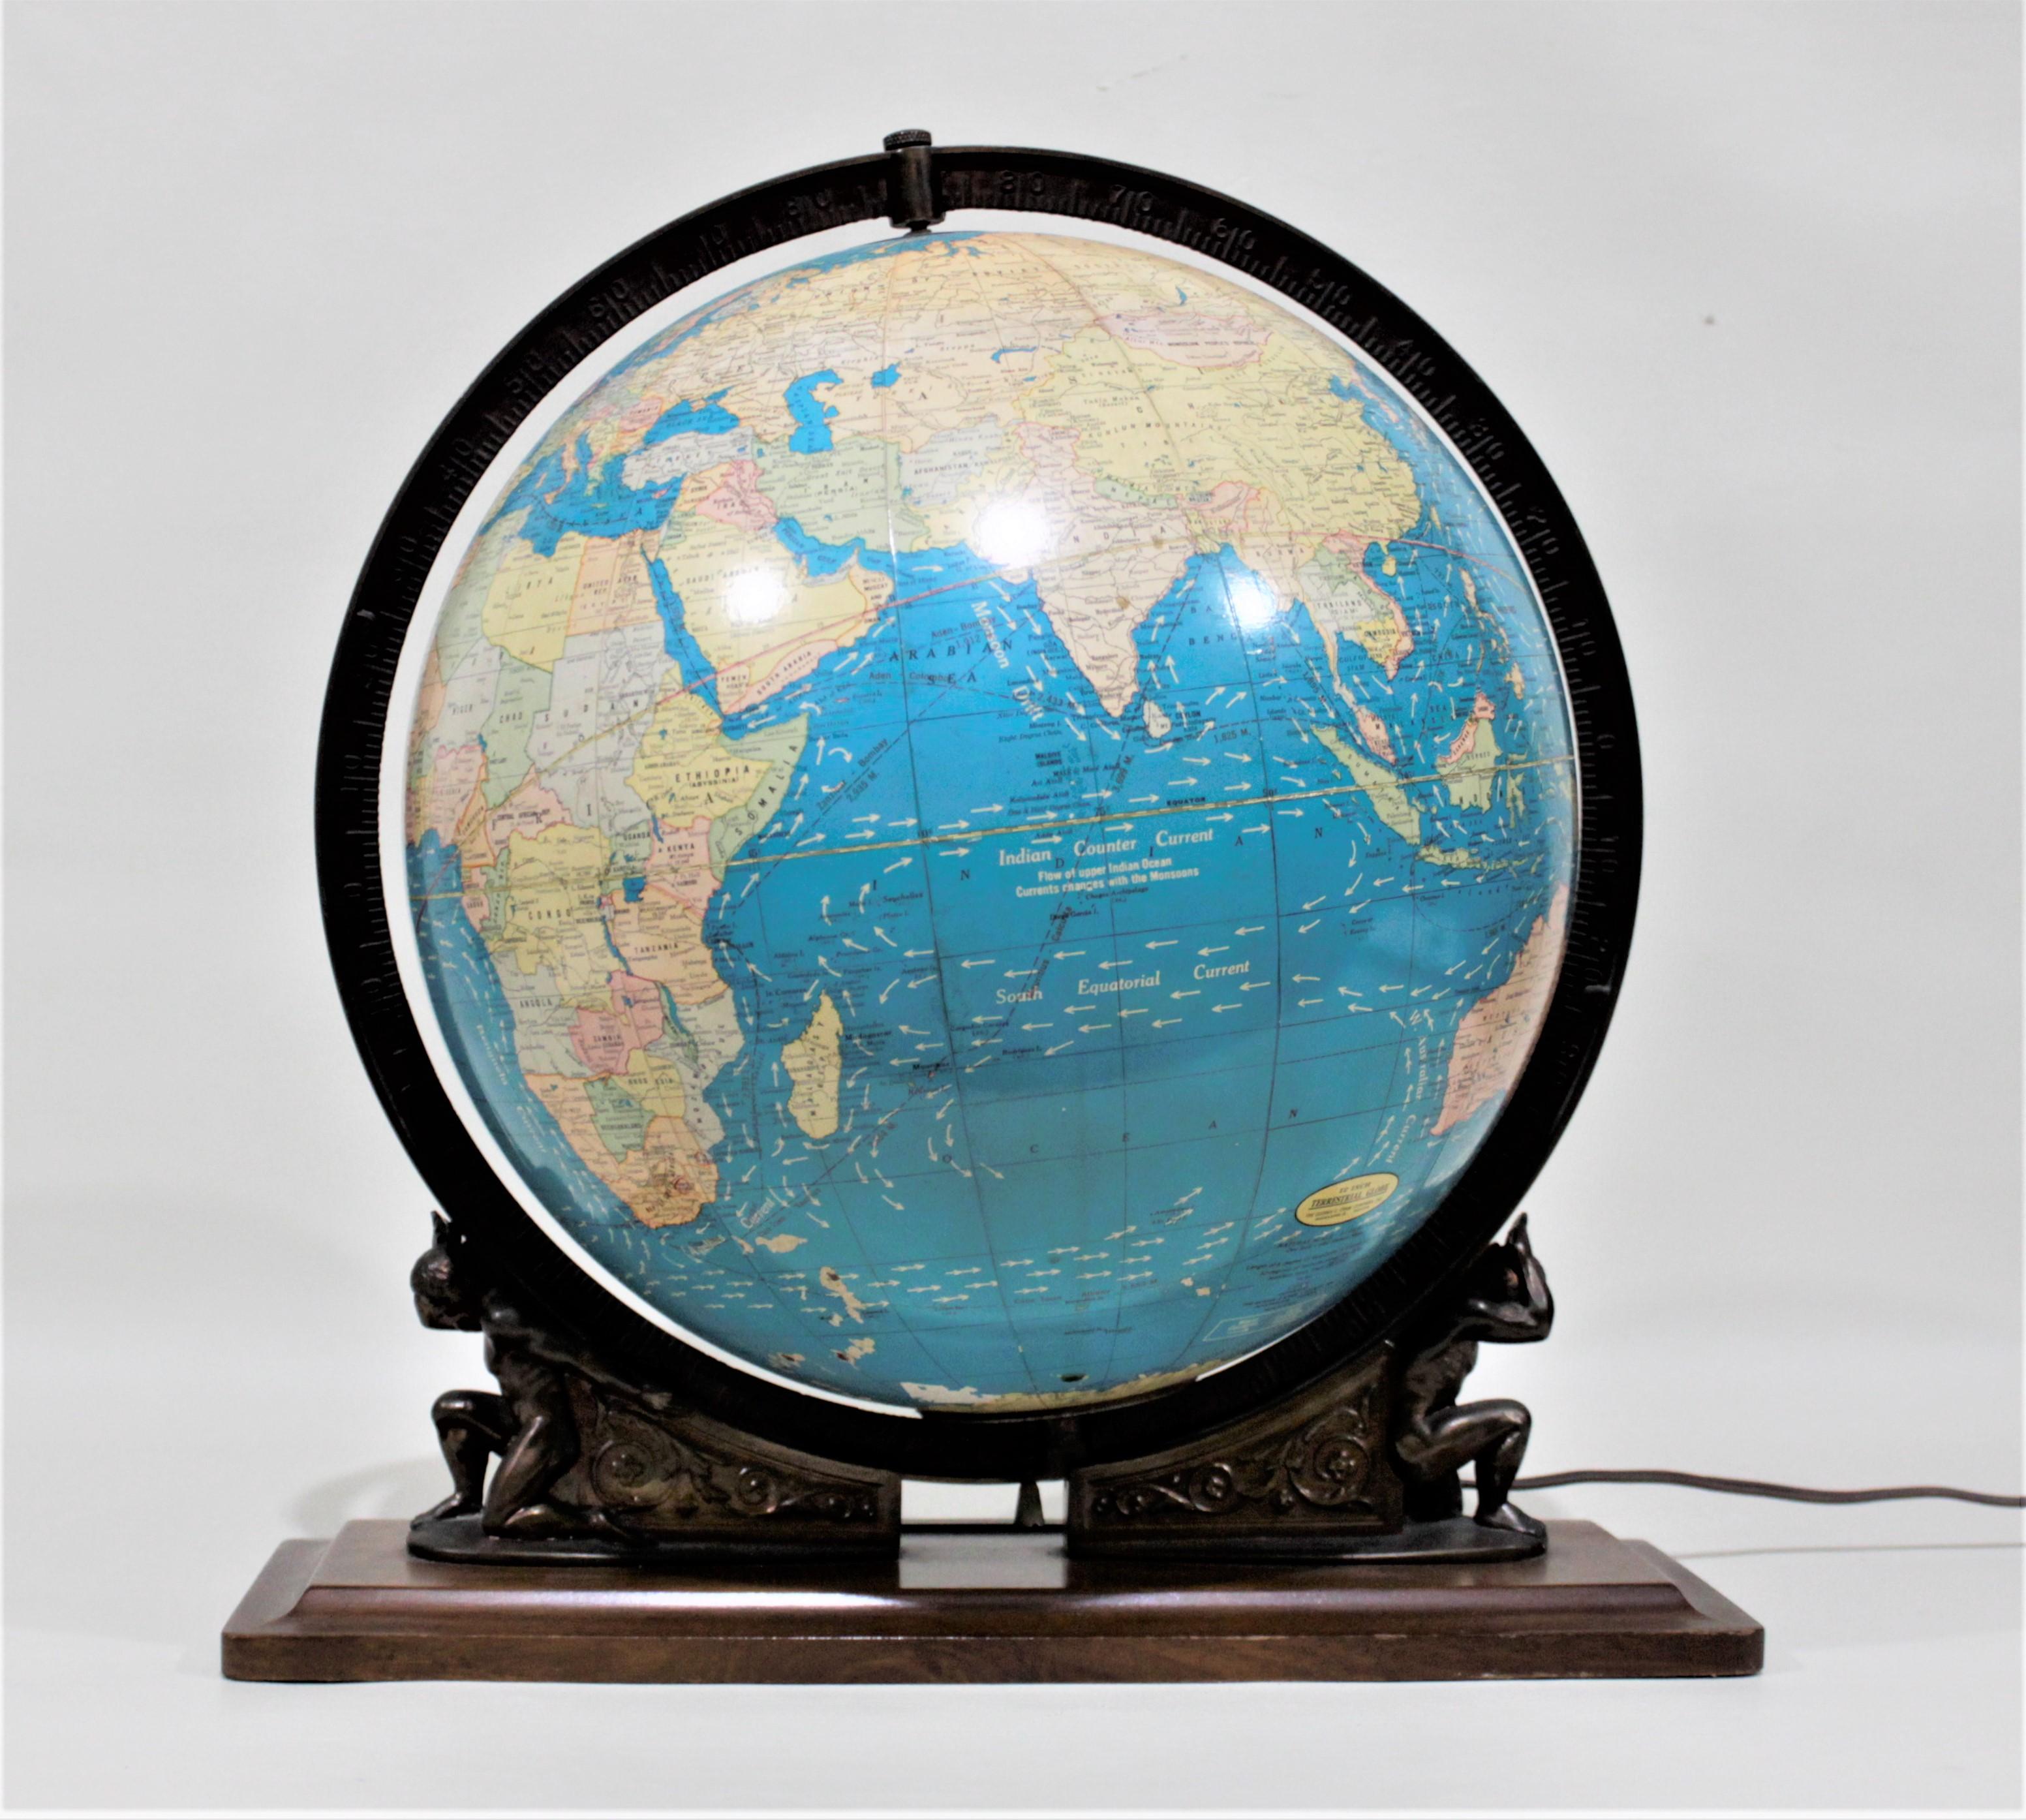 This illuminated terrestrial globe was made by the George F. Cram Company of the United States who is well known for the production of initially maps and diversified to include globes since 1928. This globe was produced in 1966 in the style of the